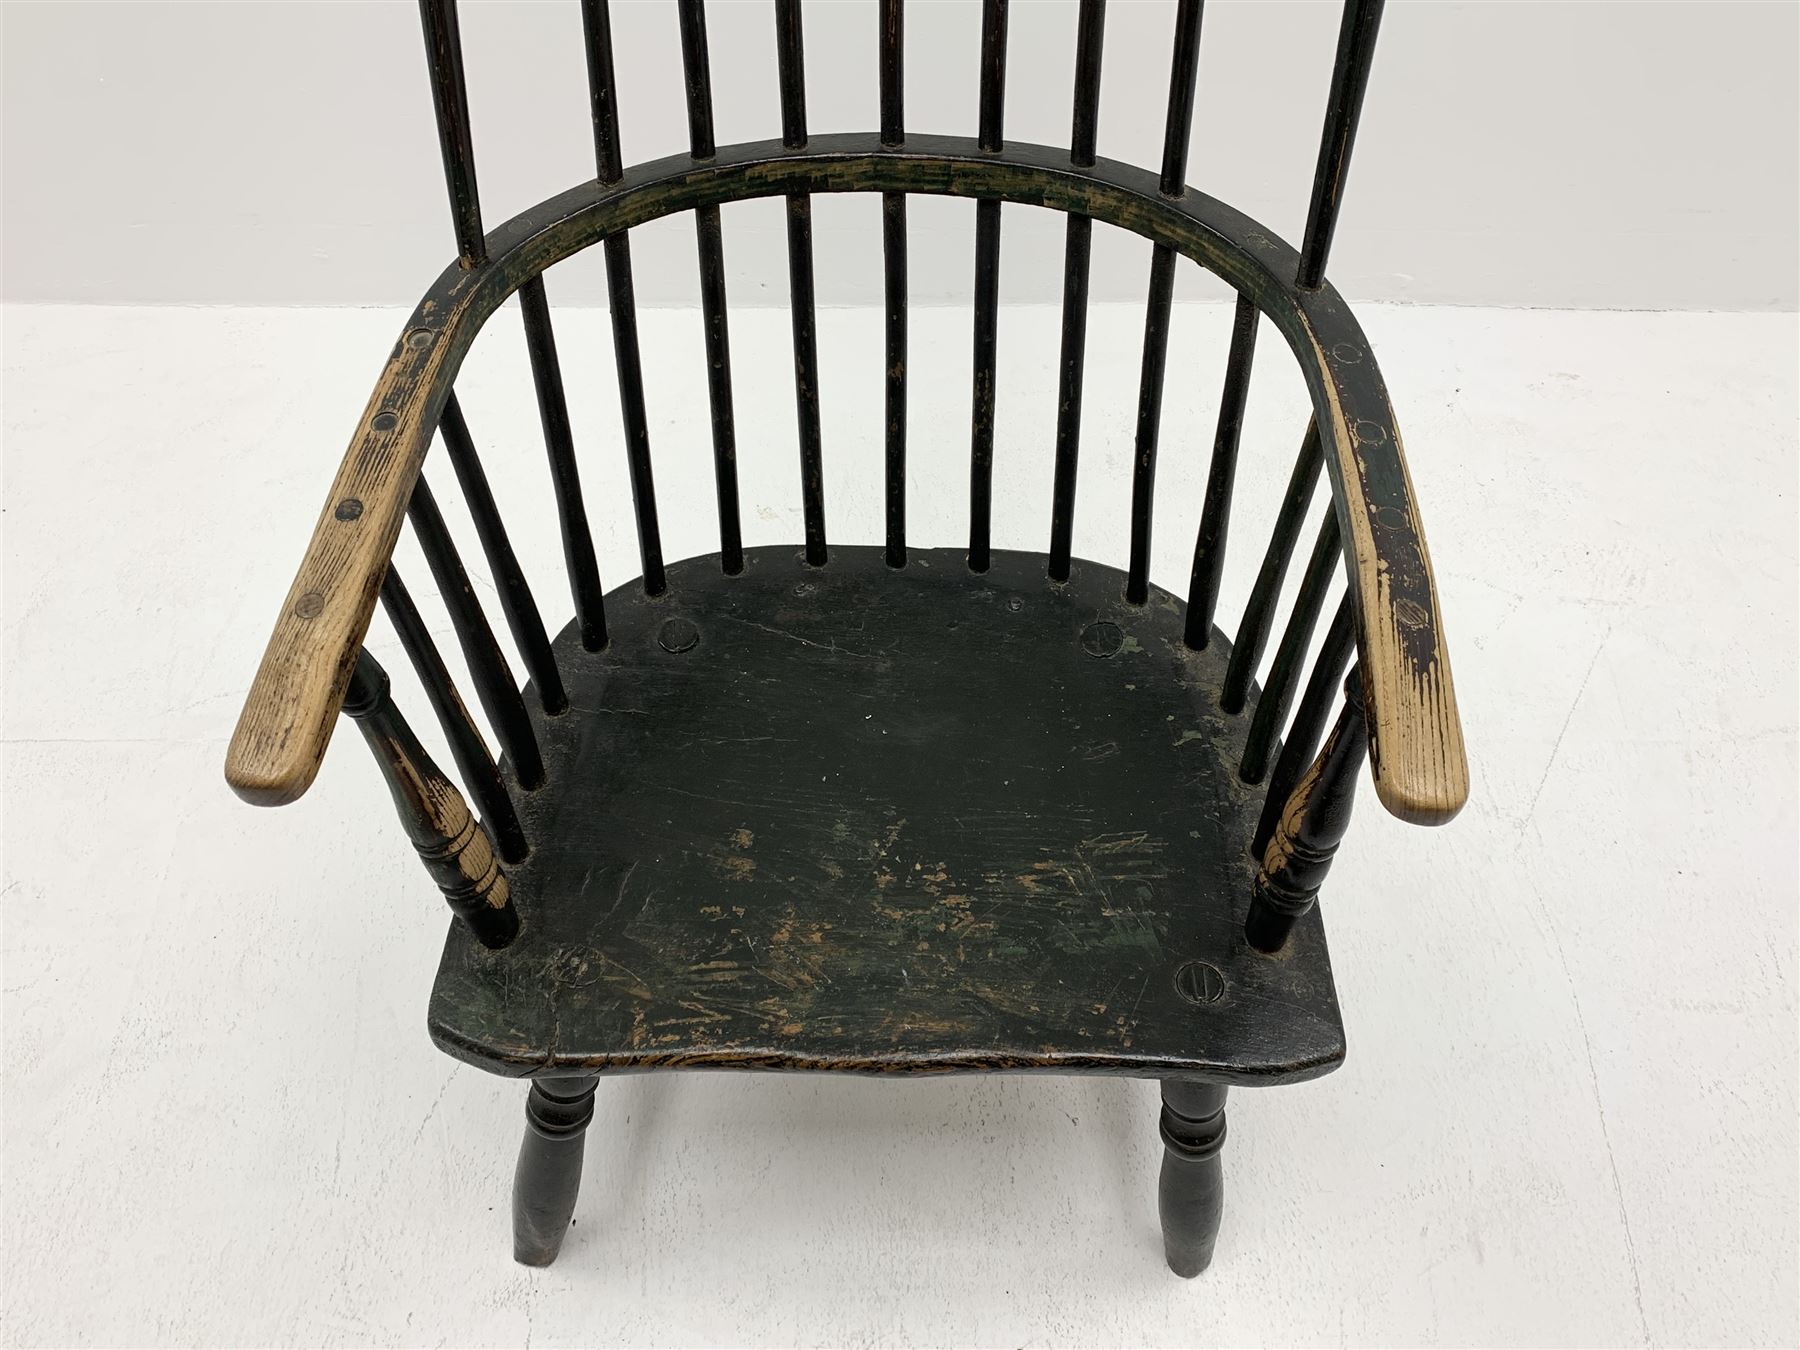 18th century elm and ash primitive vernacular Windsor armchair - Image 2 of 7